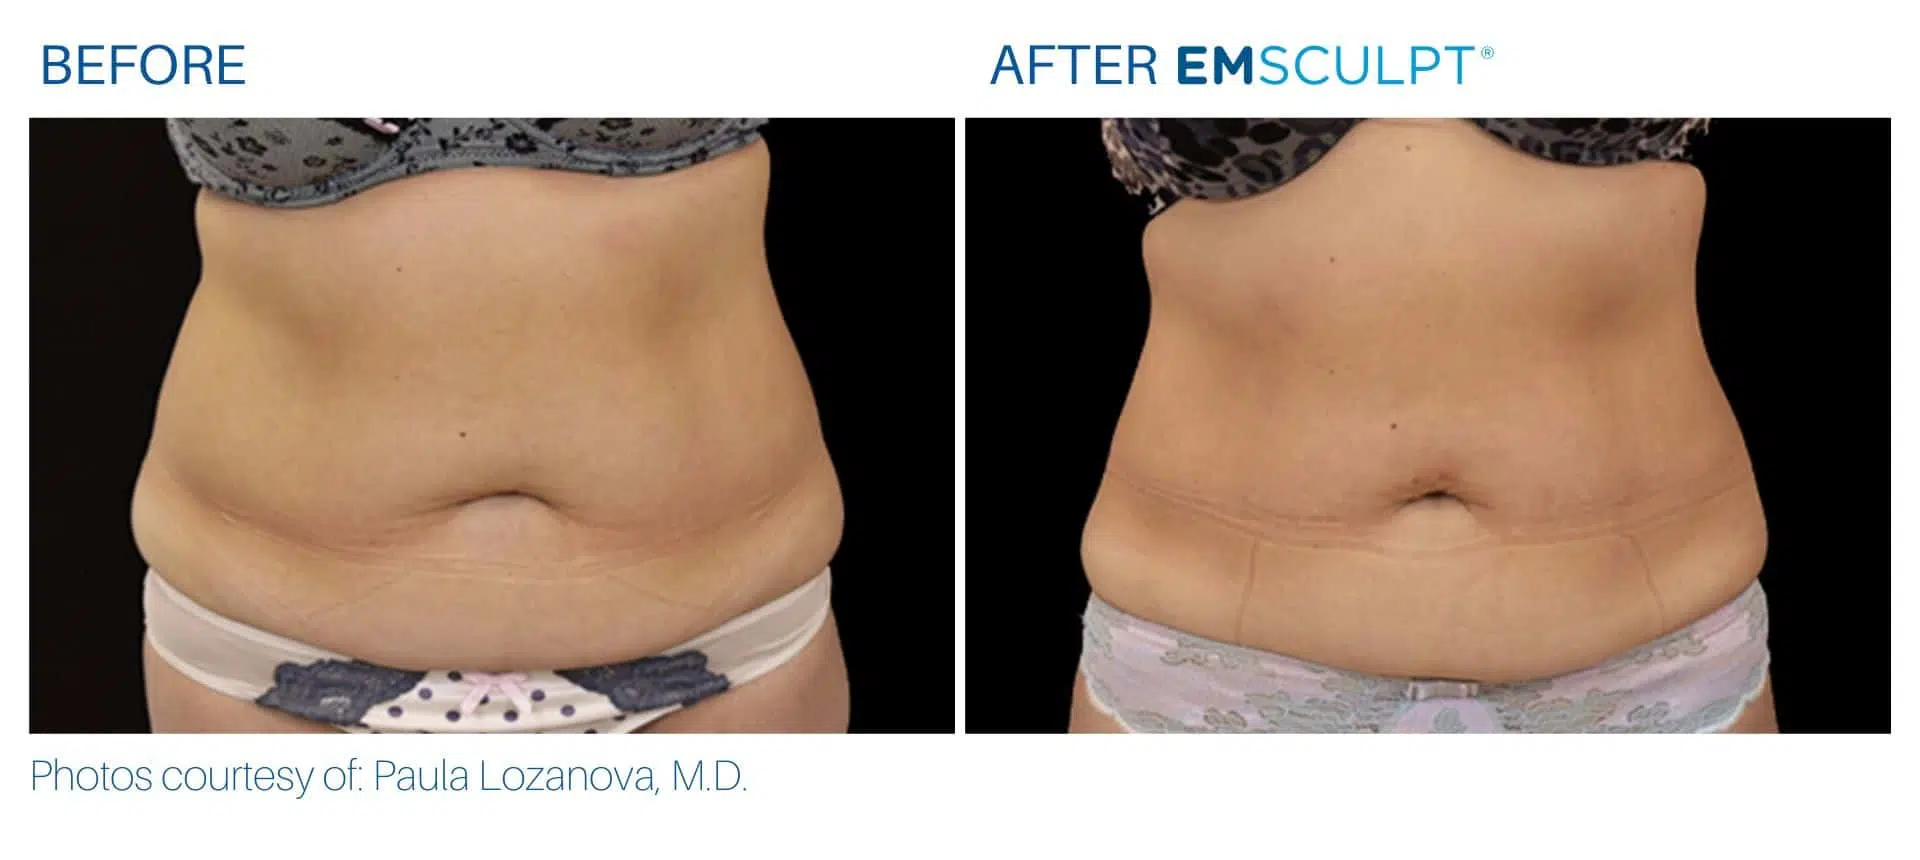 Emsculpt before and after abdomen treatment Body Morph MD